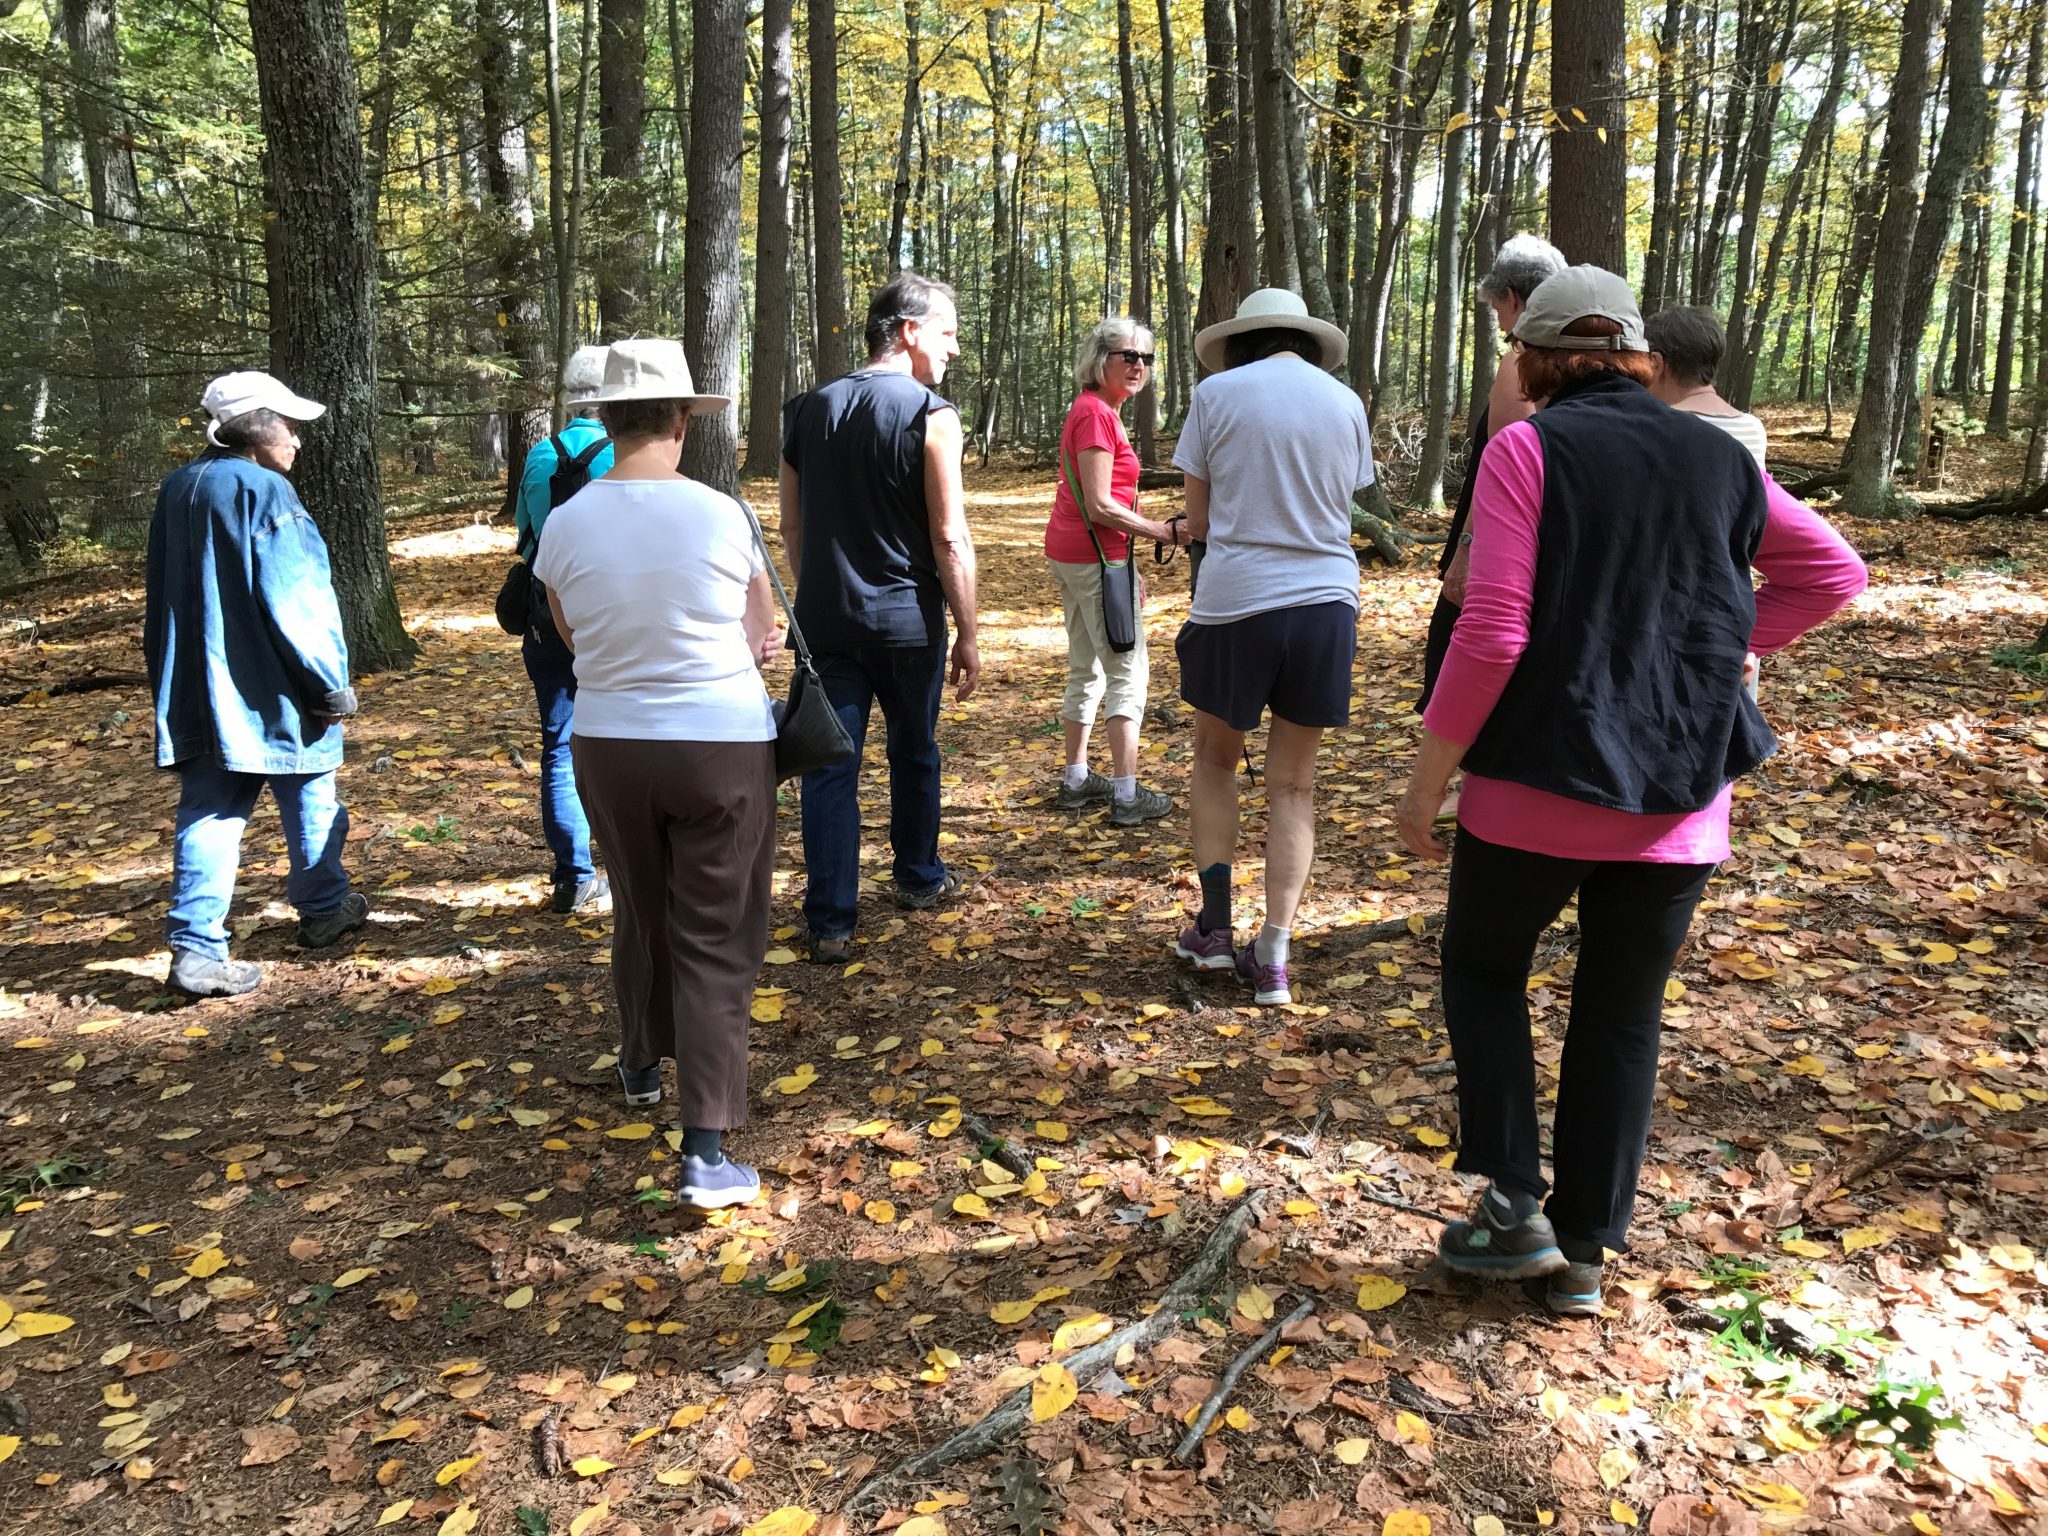 Rescheduled: Noticing Walk with John Calabria at Mt. Misery on 10/16